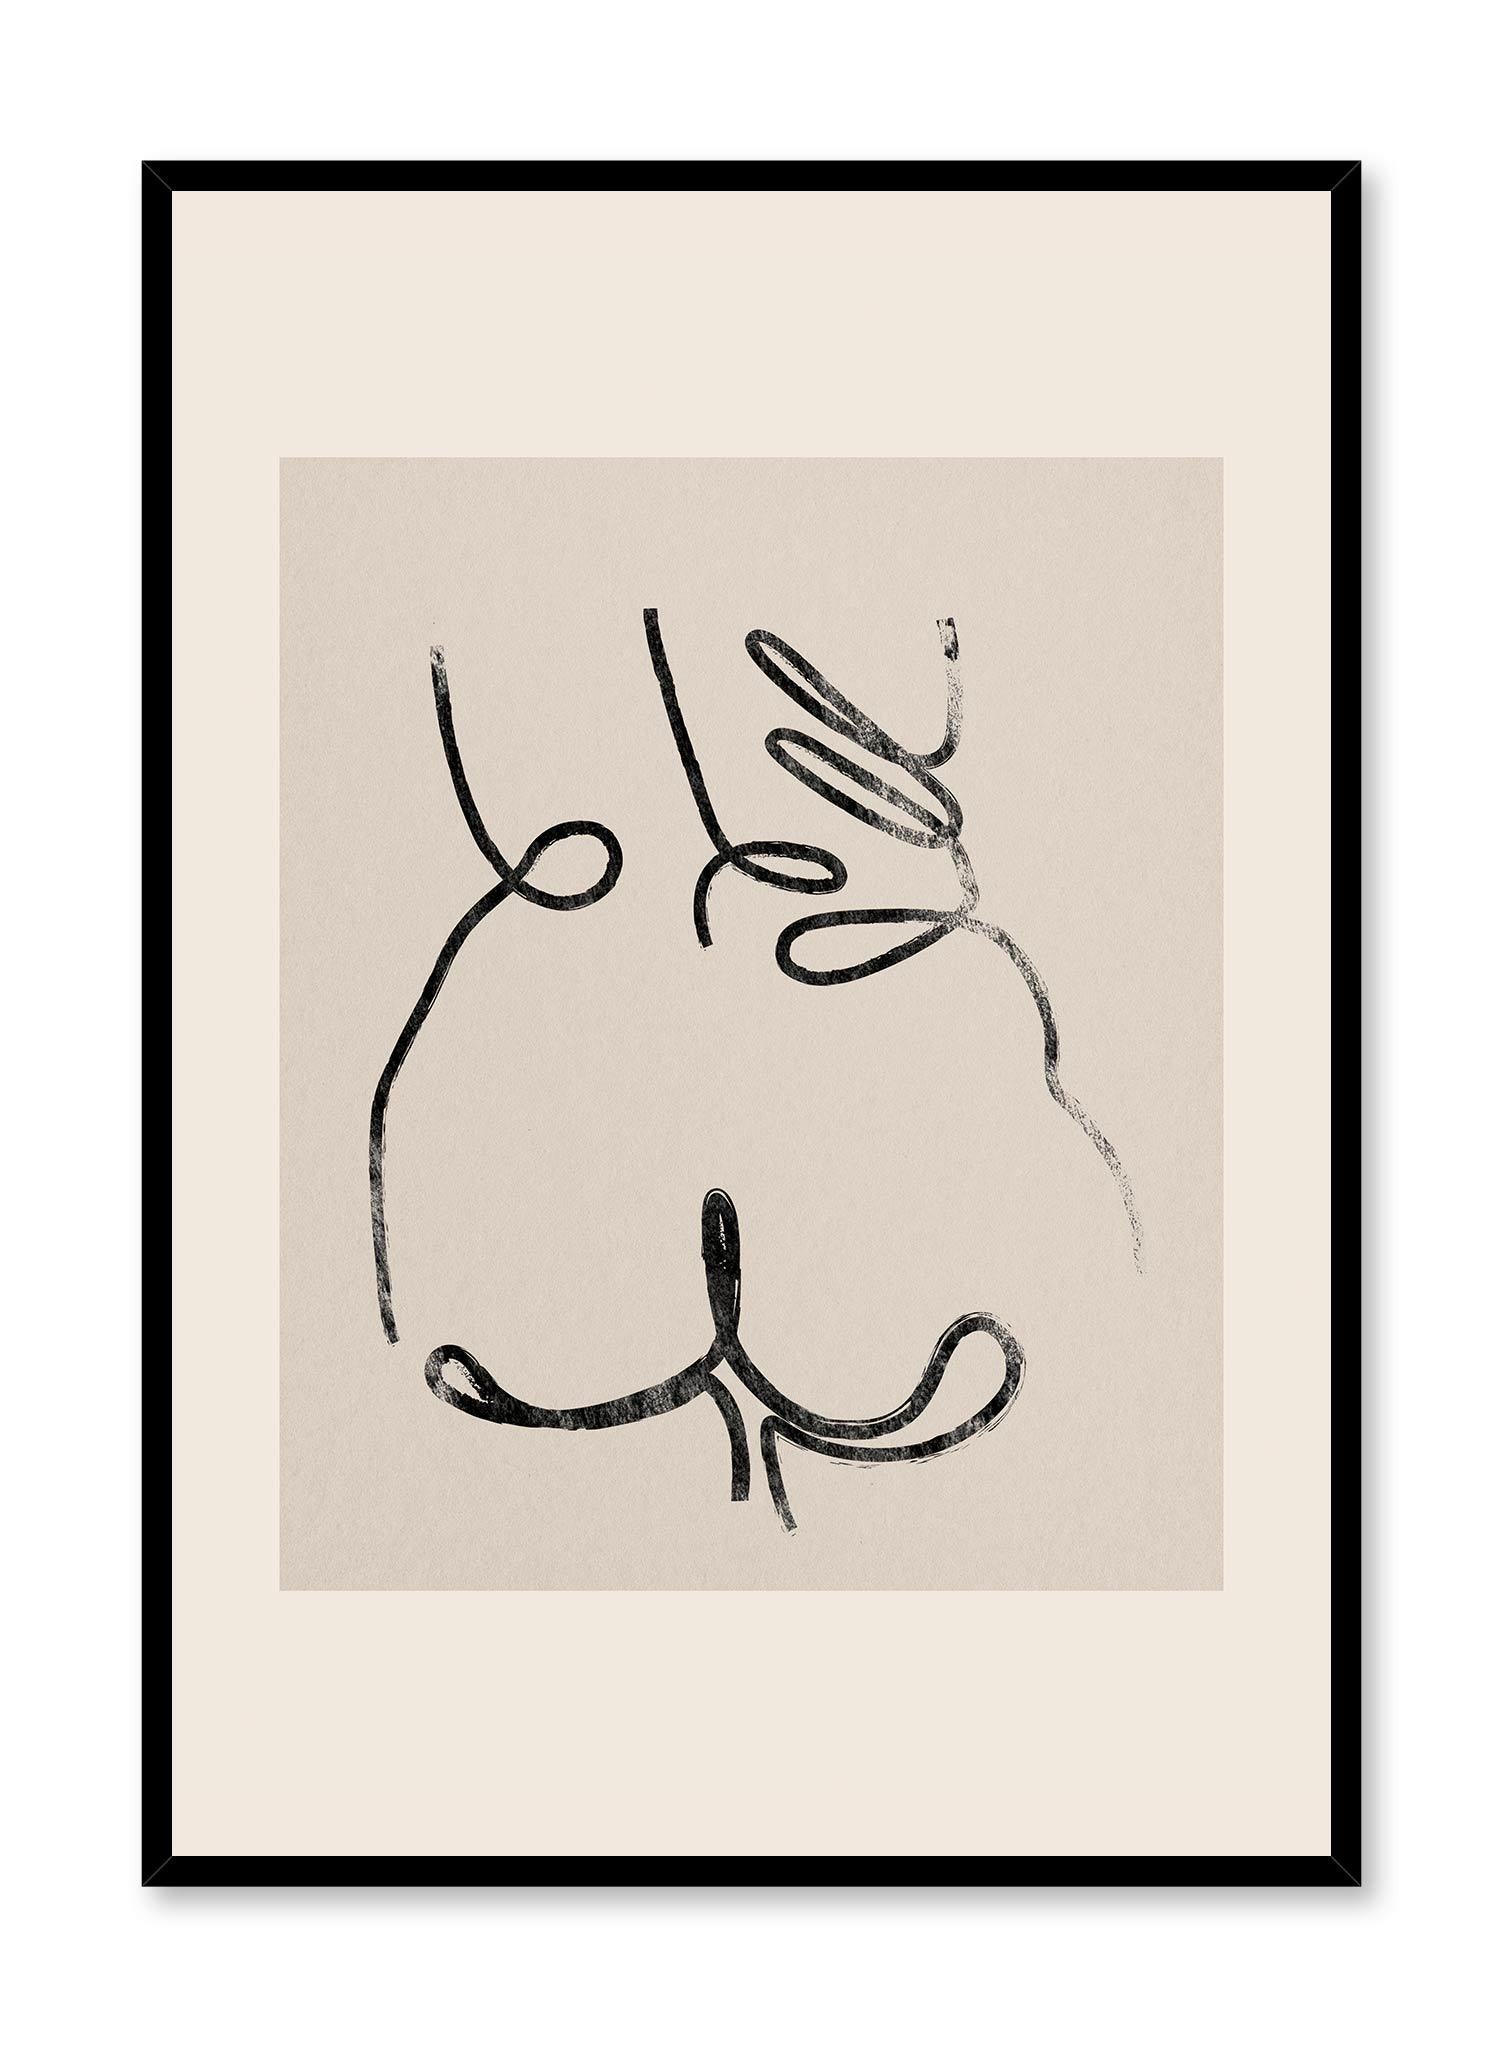 Jiggly is line art illustration of a person's glamorous butt by Opposite Wall.